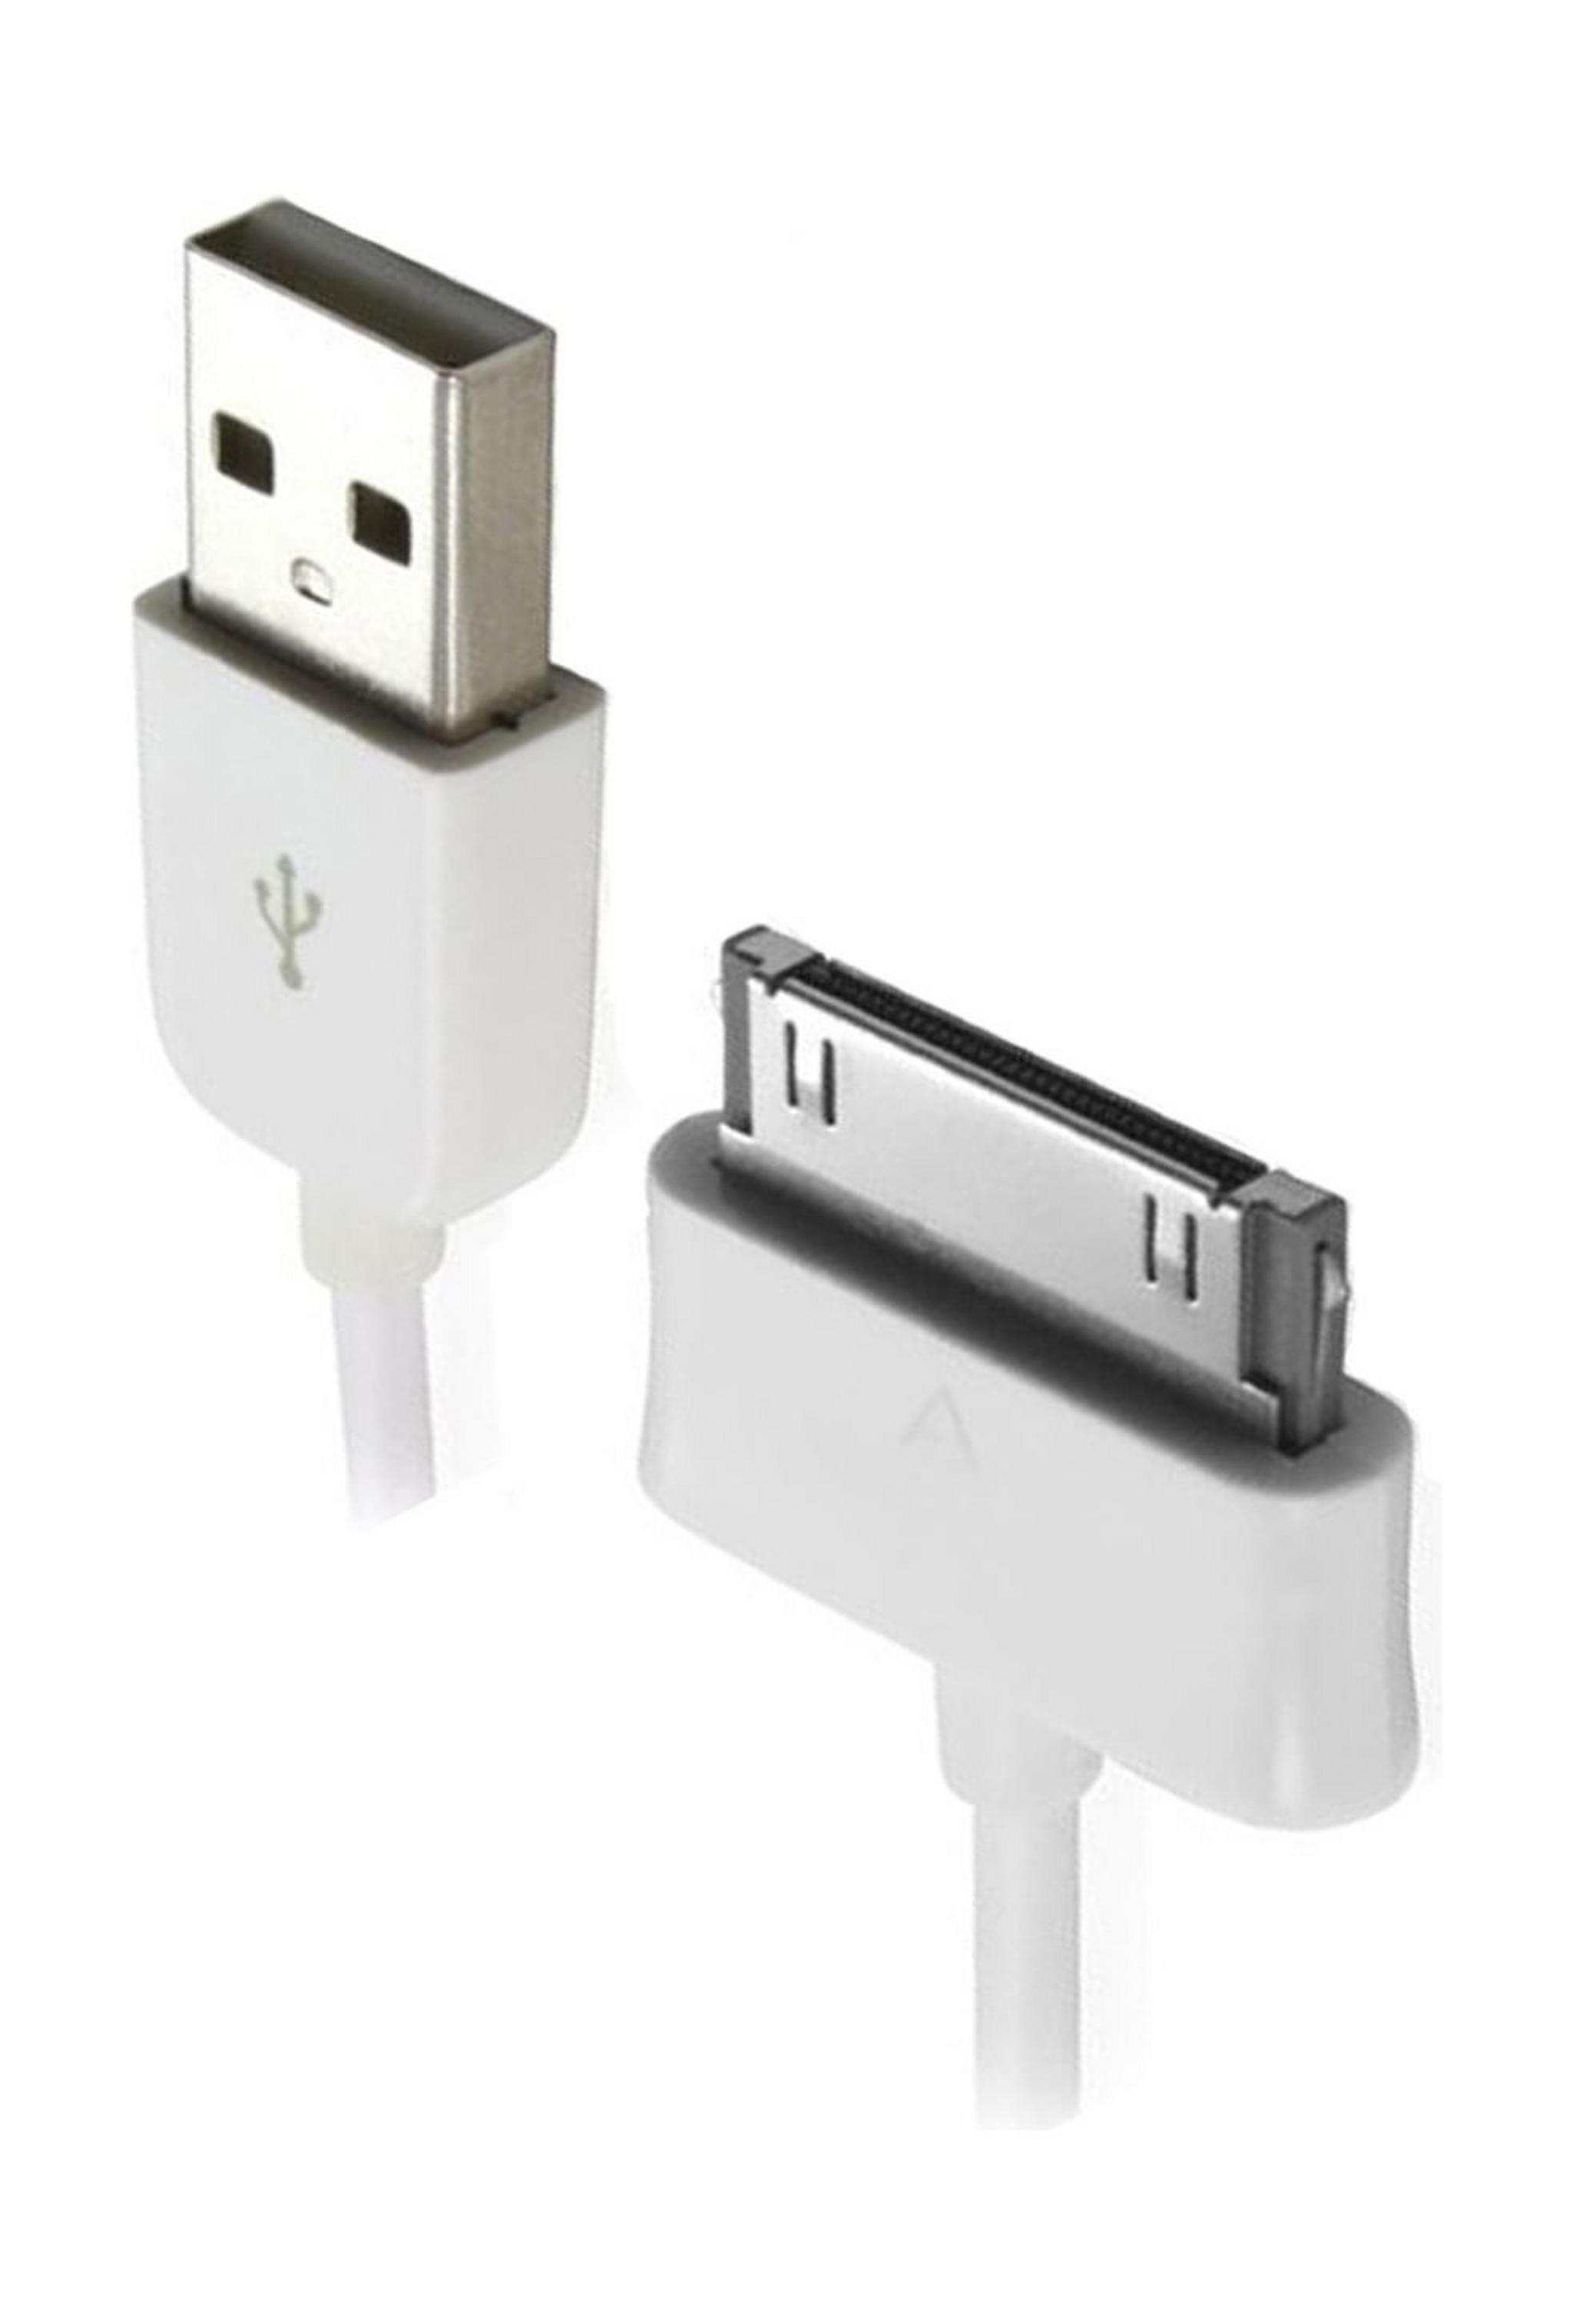 RTC IPHONE 4S USB Cable - 5M